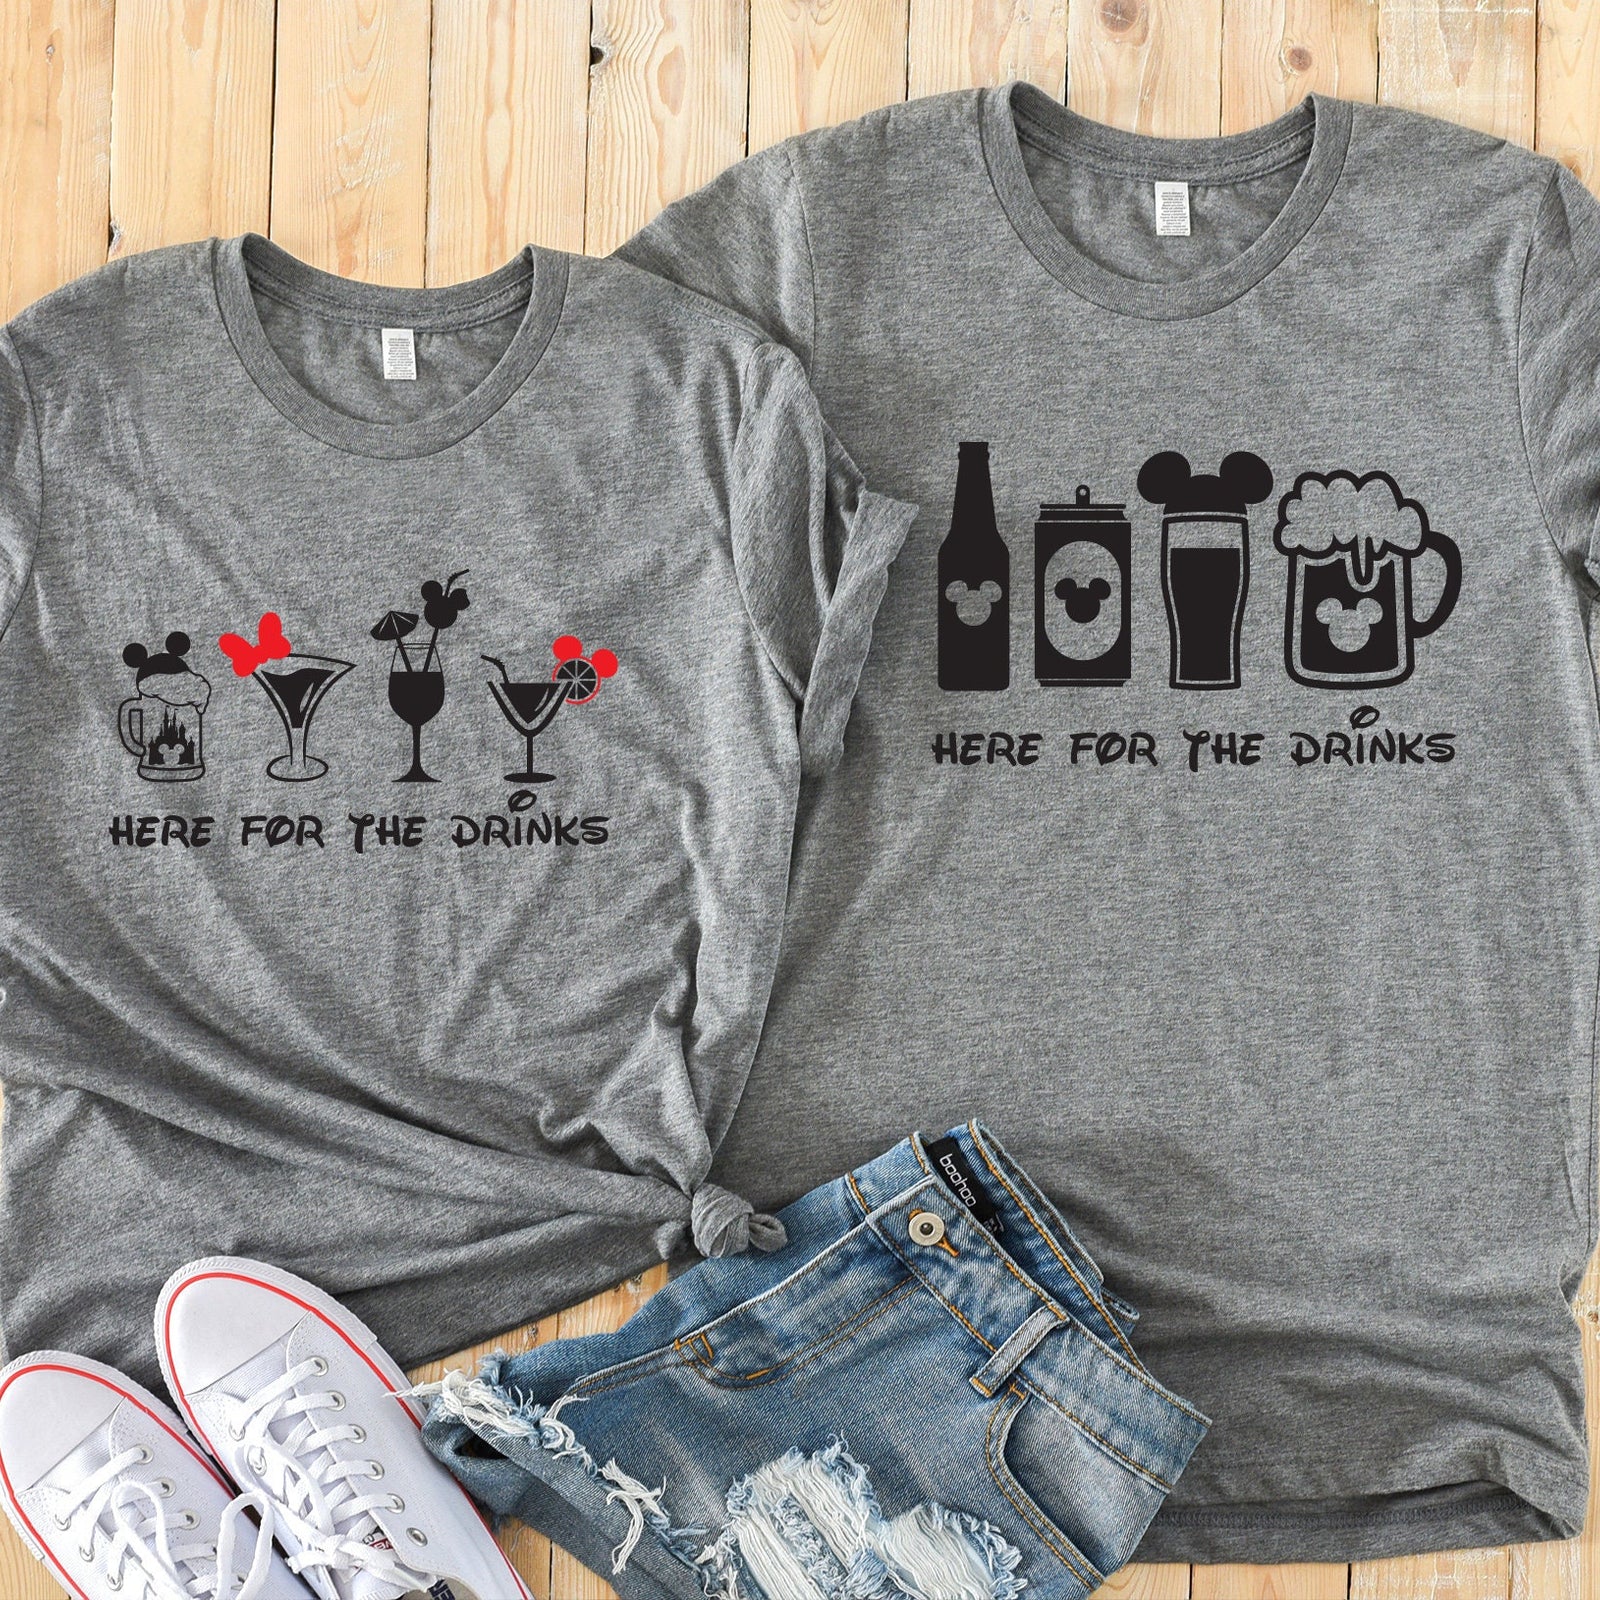 Here for the Drinks - Funny Disney Couples Shirt - Matching Disney Shirts - Food and Wine Festival